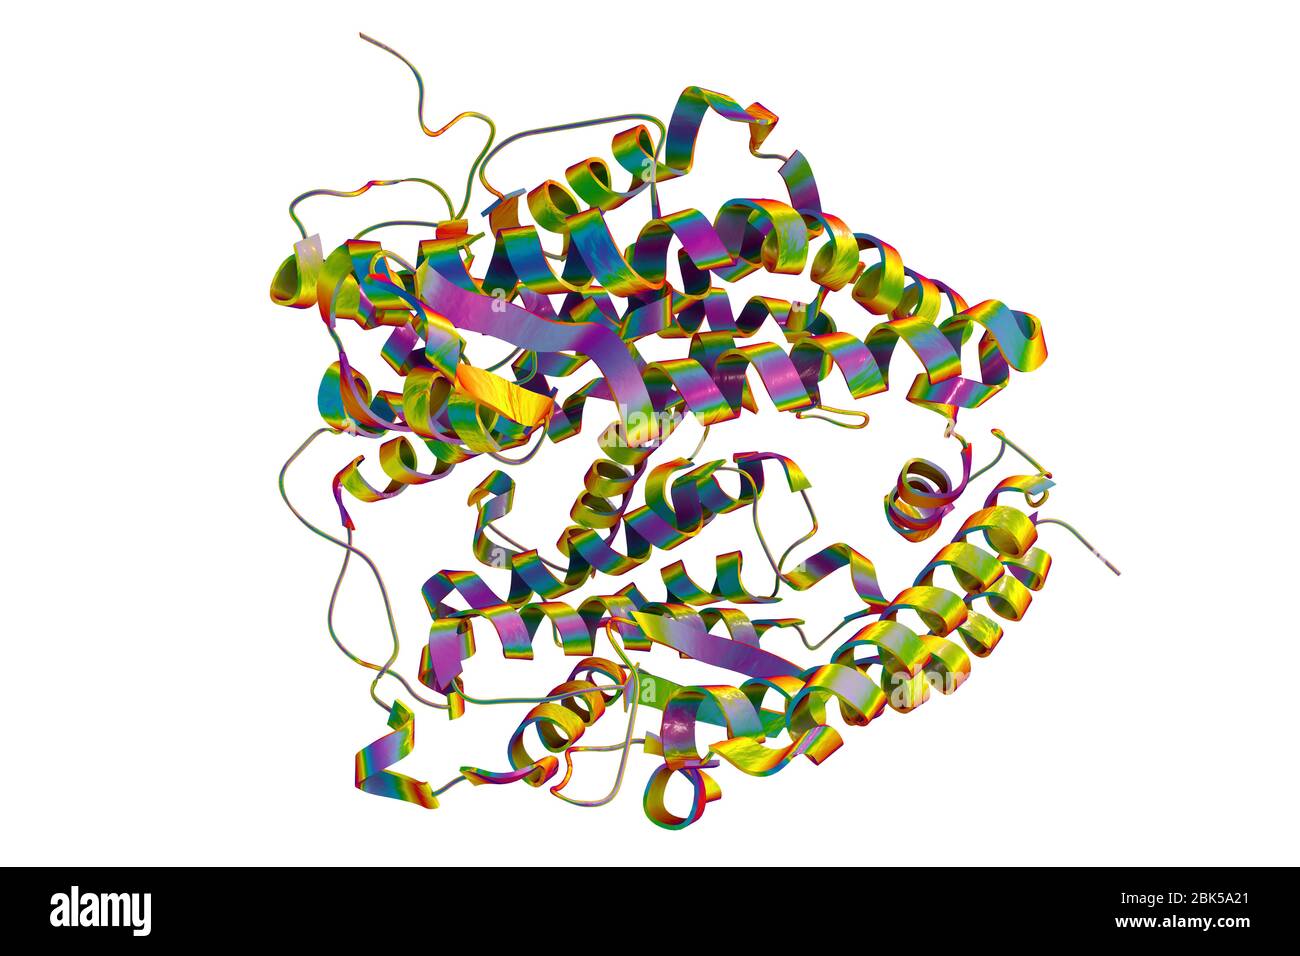 Human ACE2 receptor, computer illustration. The receptor is an angiotensin-converting enzyme 2 (ACE2) type receptor, which is the entry route for all coronavirus particle types. Covid-19, which emerged in Wuhan, China, in December 2019, is a mild respiratory illness that can develop into pneumonia and be fatal in some cases. It is caused by the SARS-CoV-2 (previously 2019-nCoV) coronavirus. Stock Photo